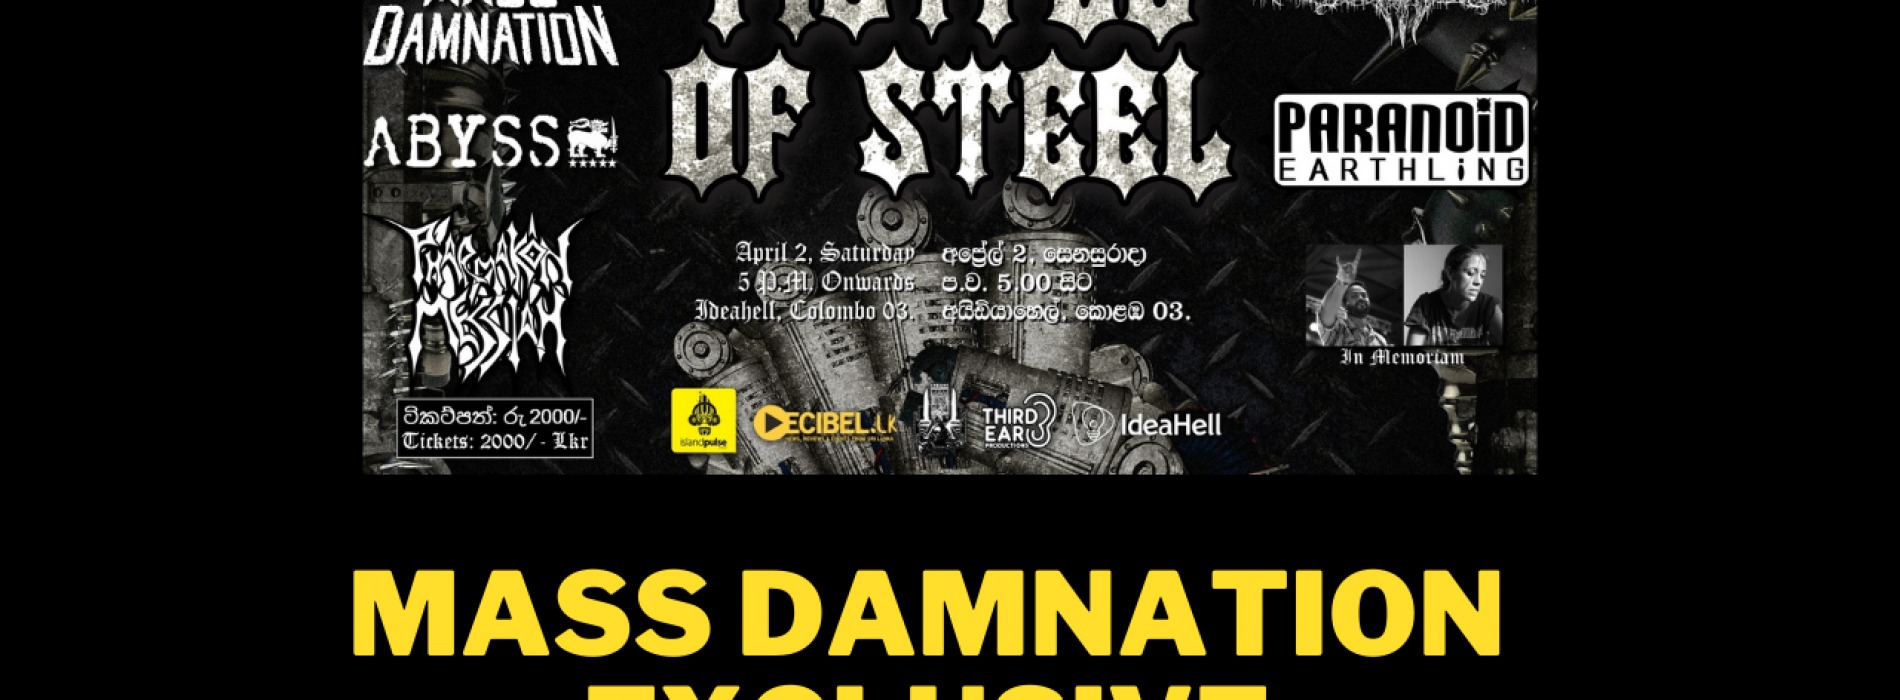 News : Mass Damnation To Perform @ A Fistful Of Steel This April